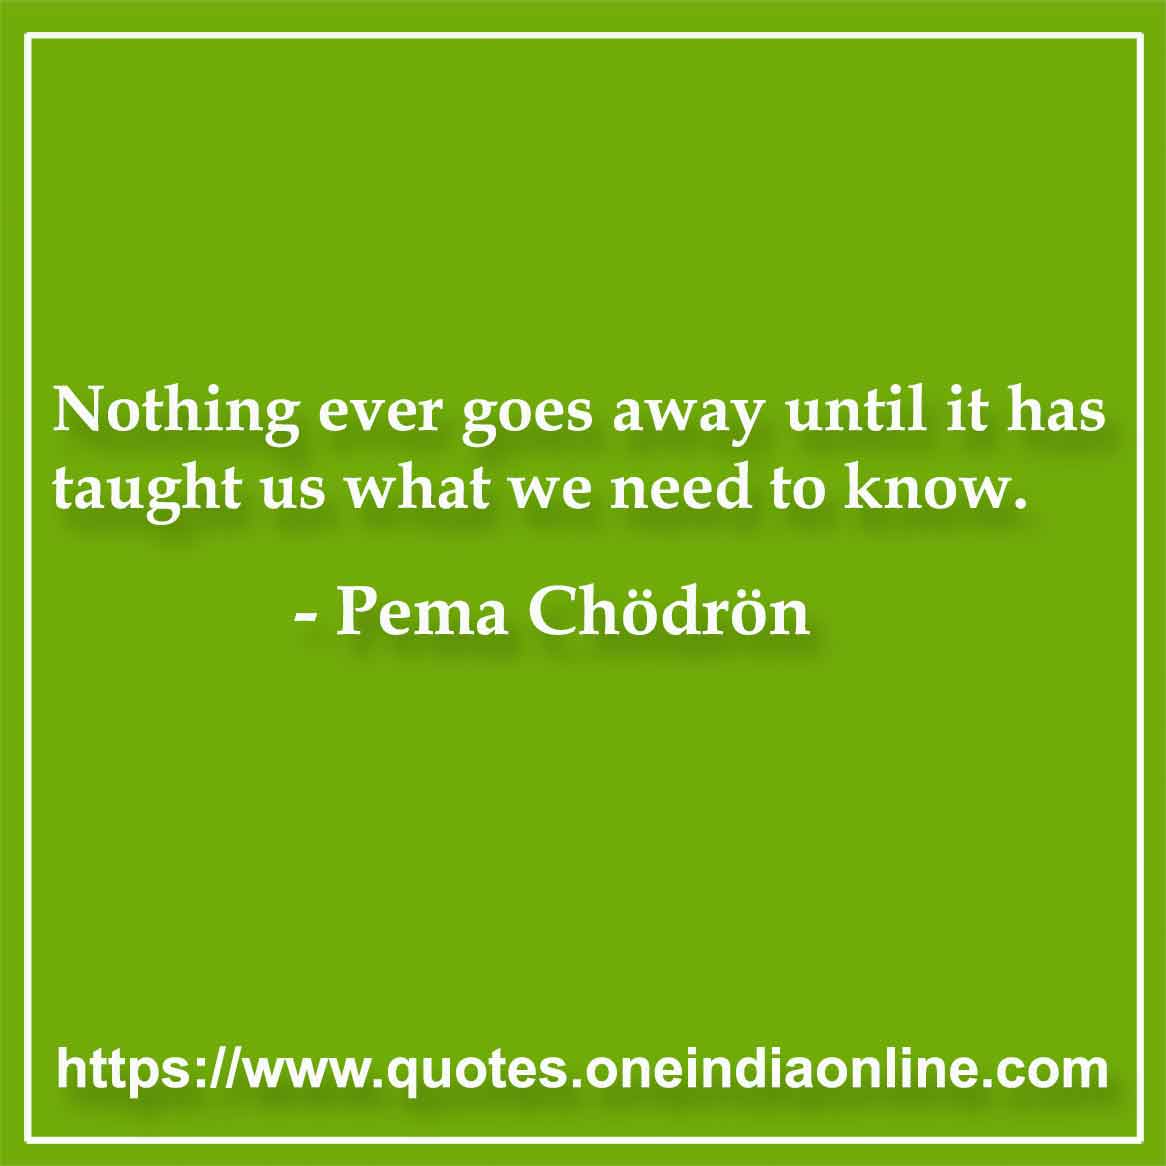 Nothing ever goes away until it has taught us what we need to know. 

-  Pema Chodron